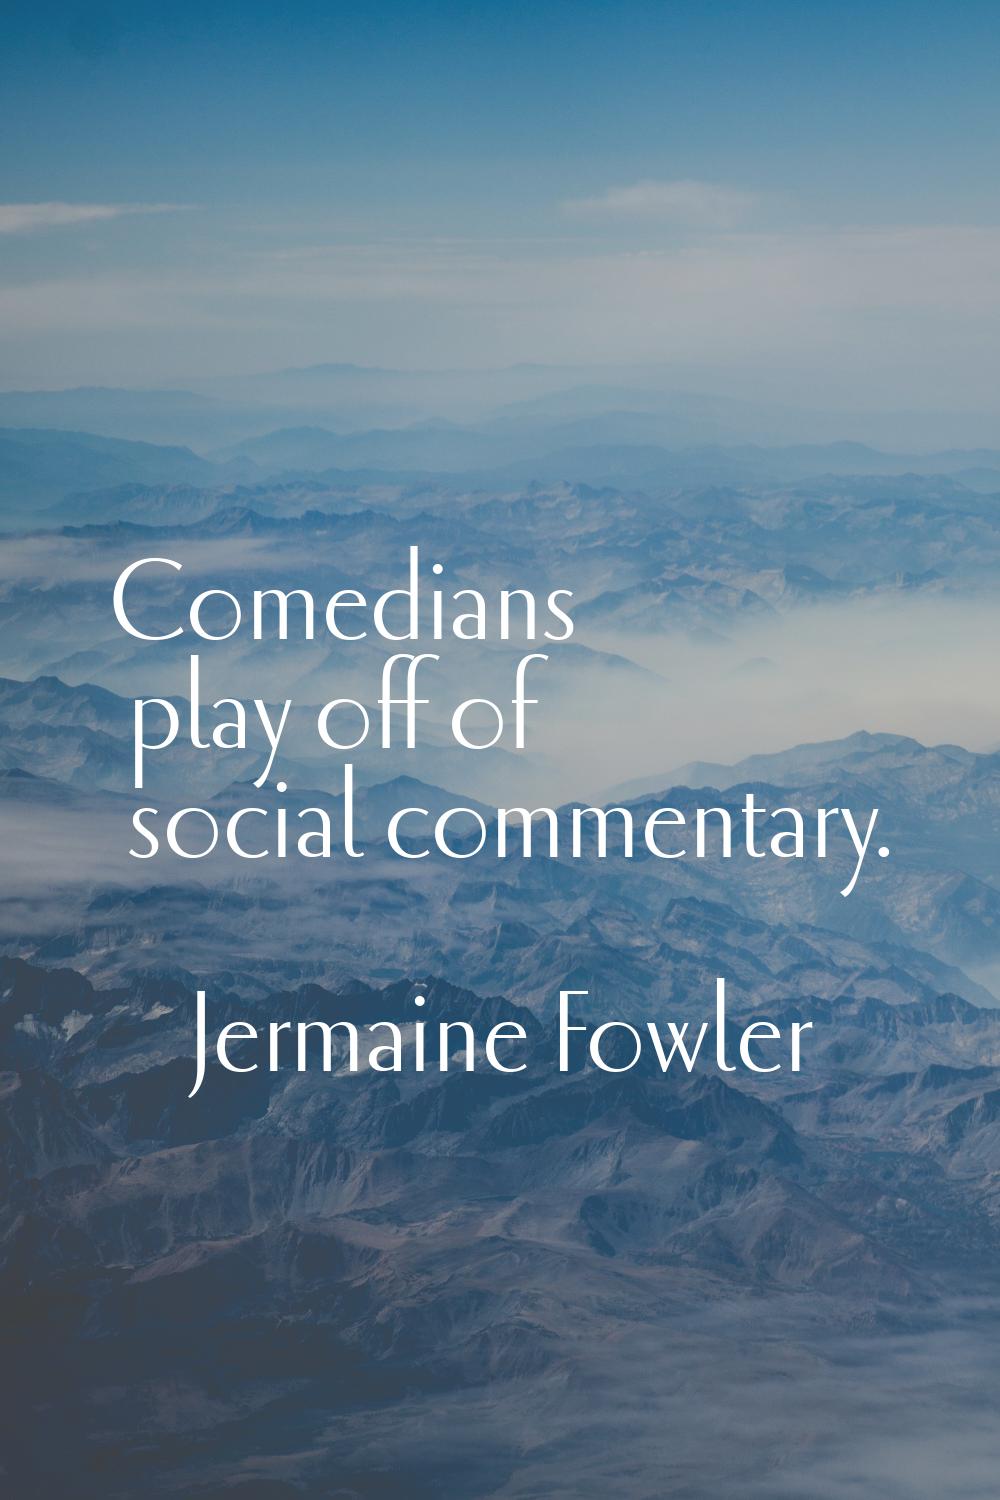 Comedians play off of social commentary.